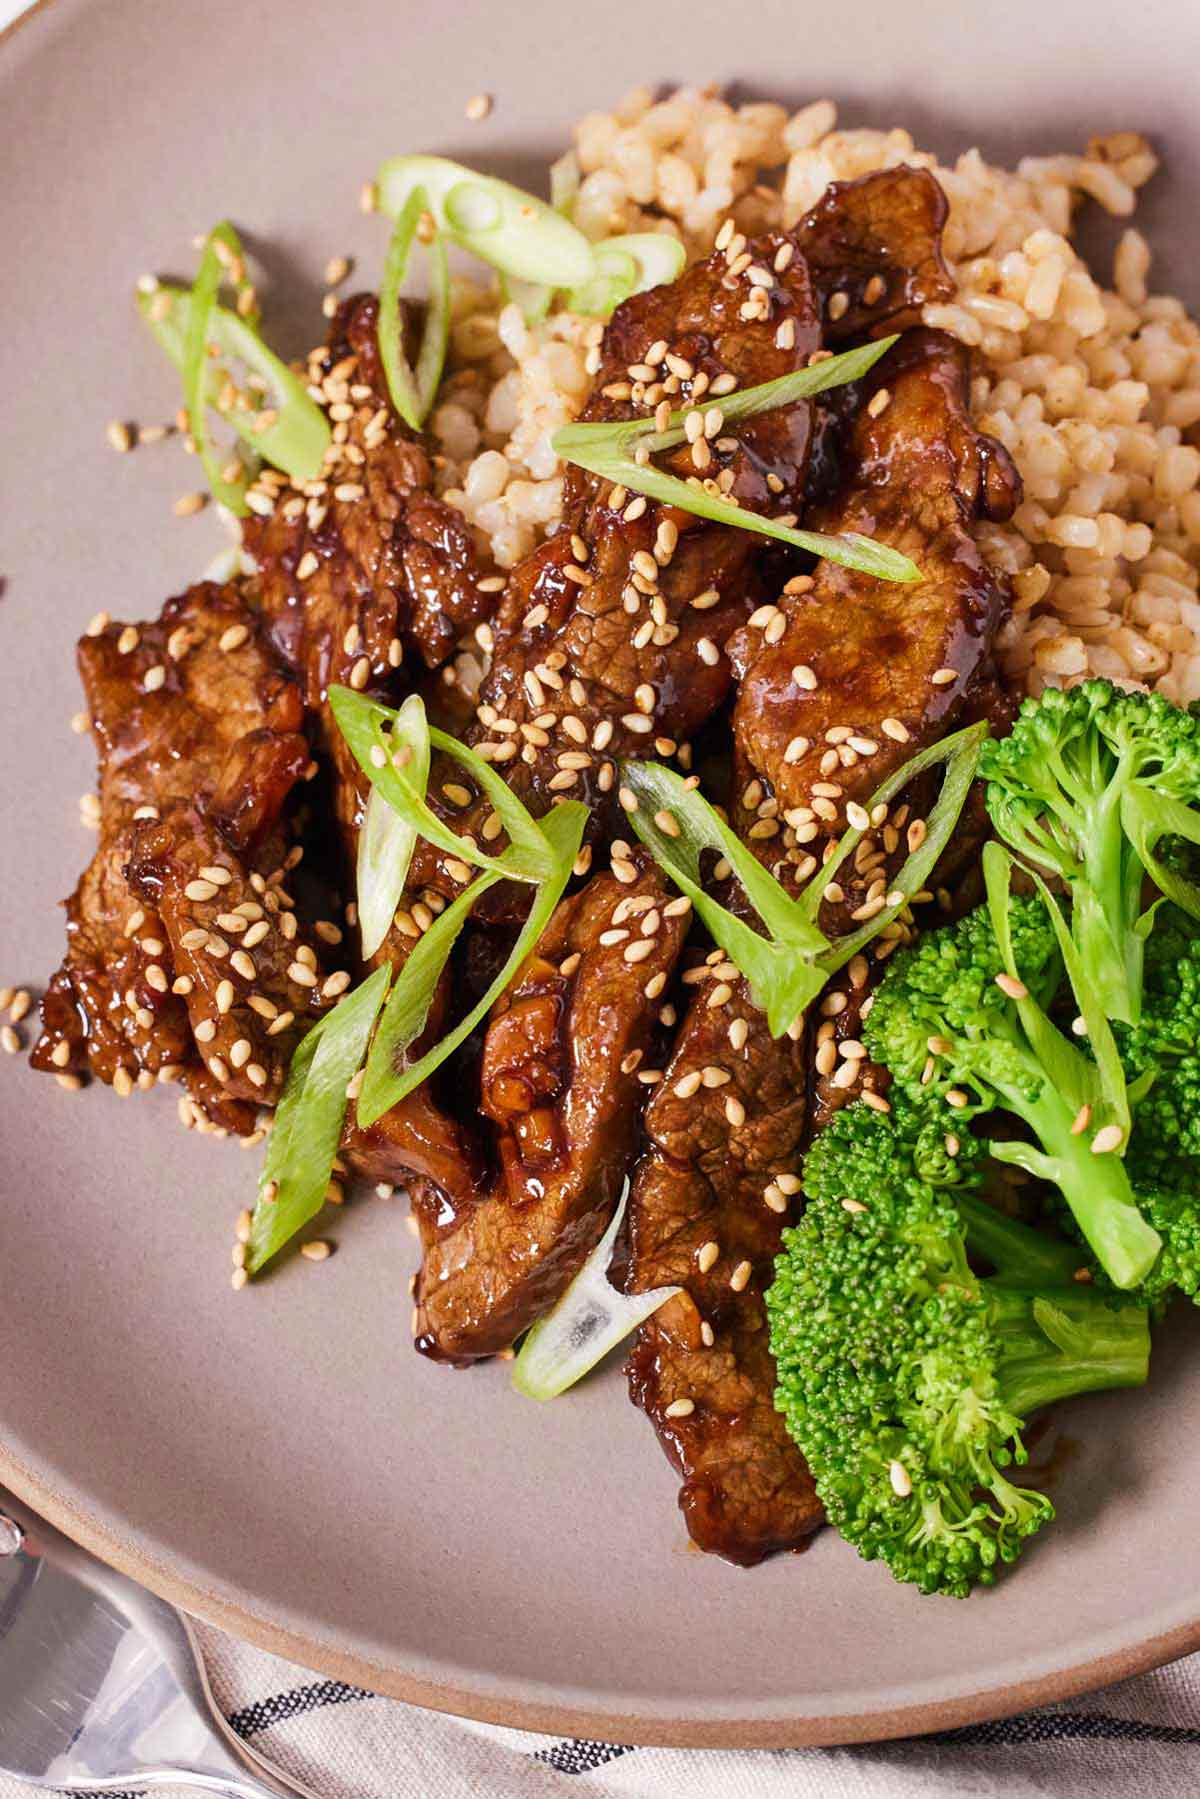 Orange beef on a plate with rice, broccoli, and scallions.